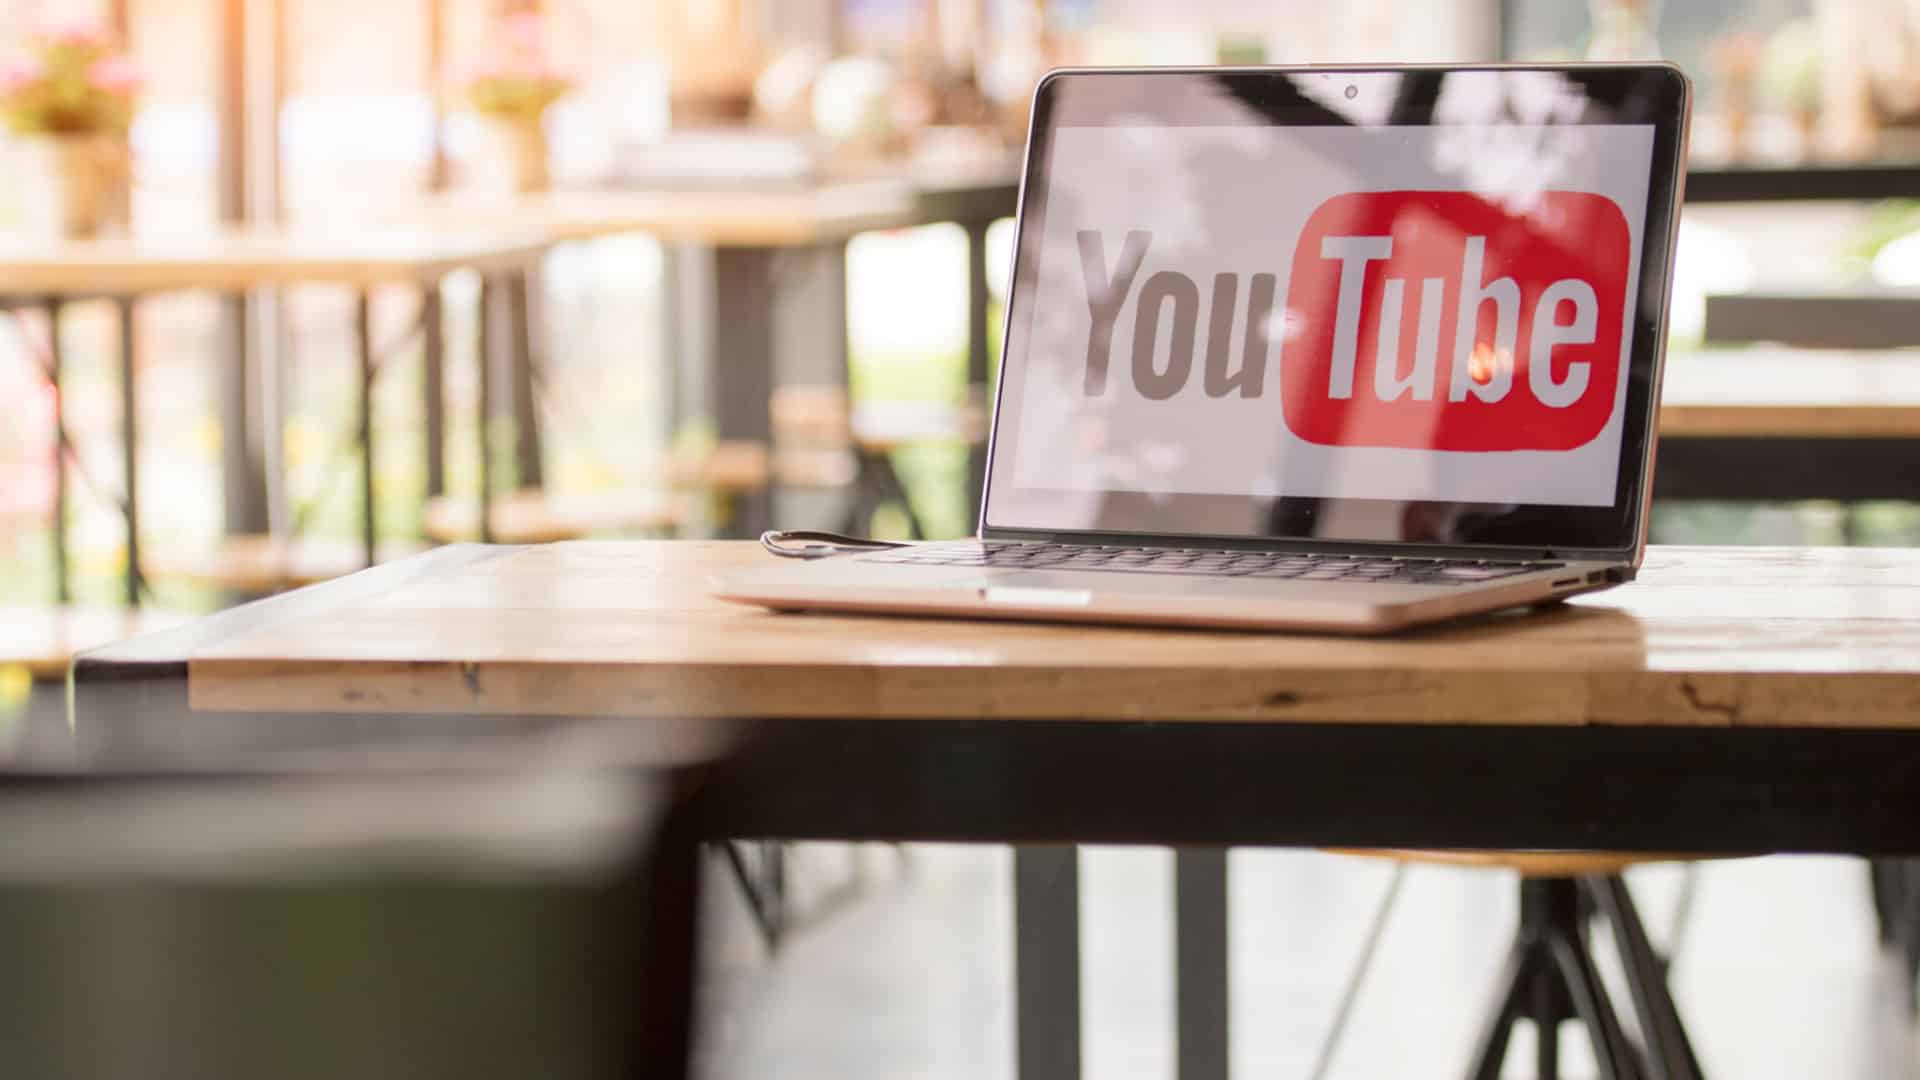 How to pause YouTube videos dynamically with JS without swapping out the URL